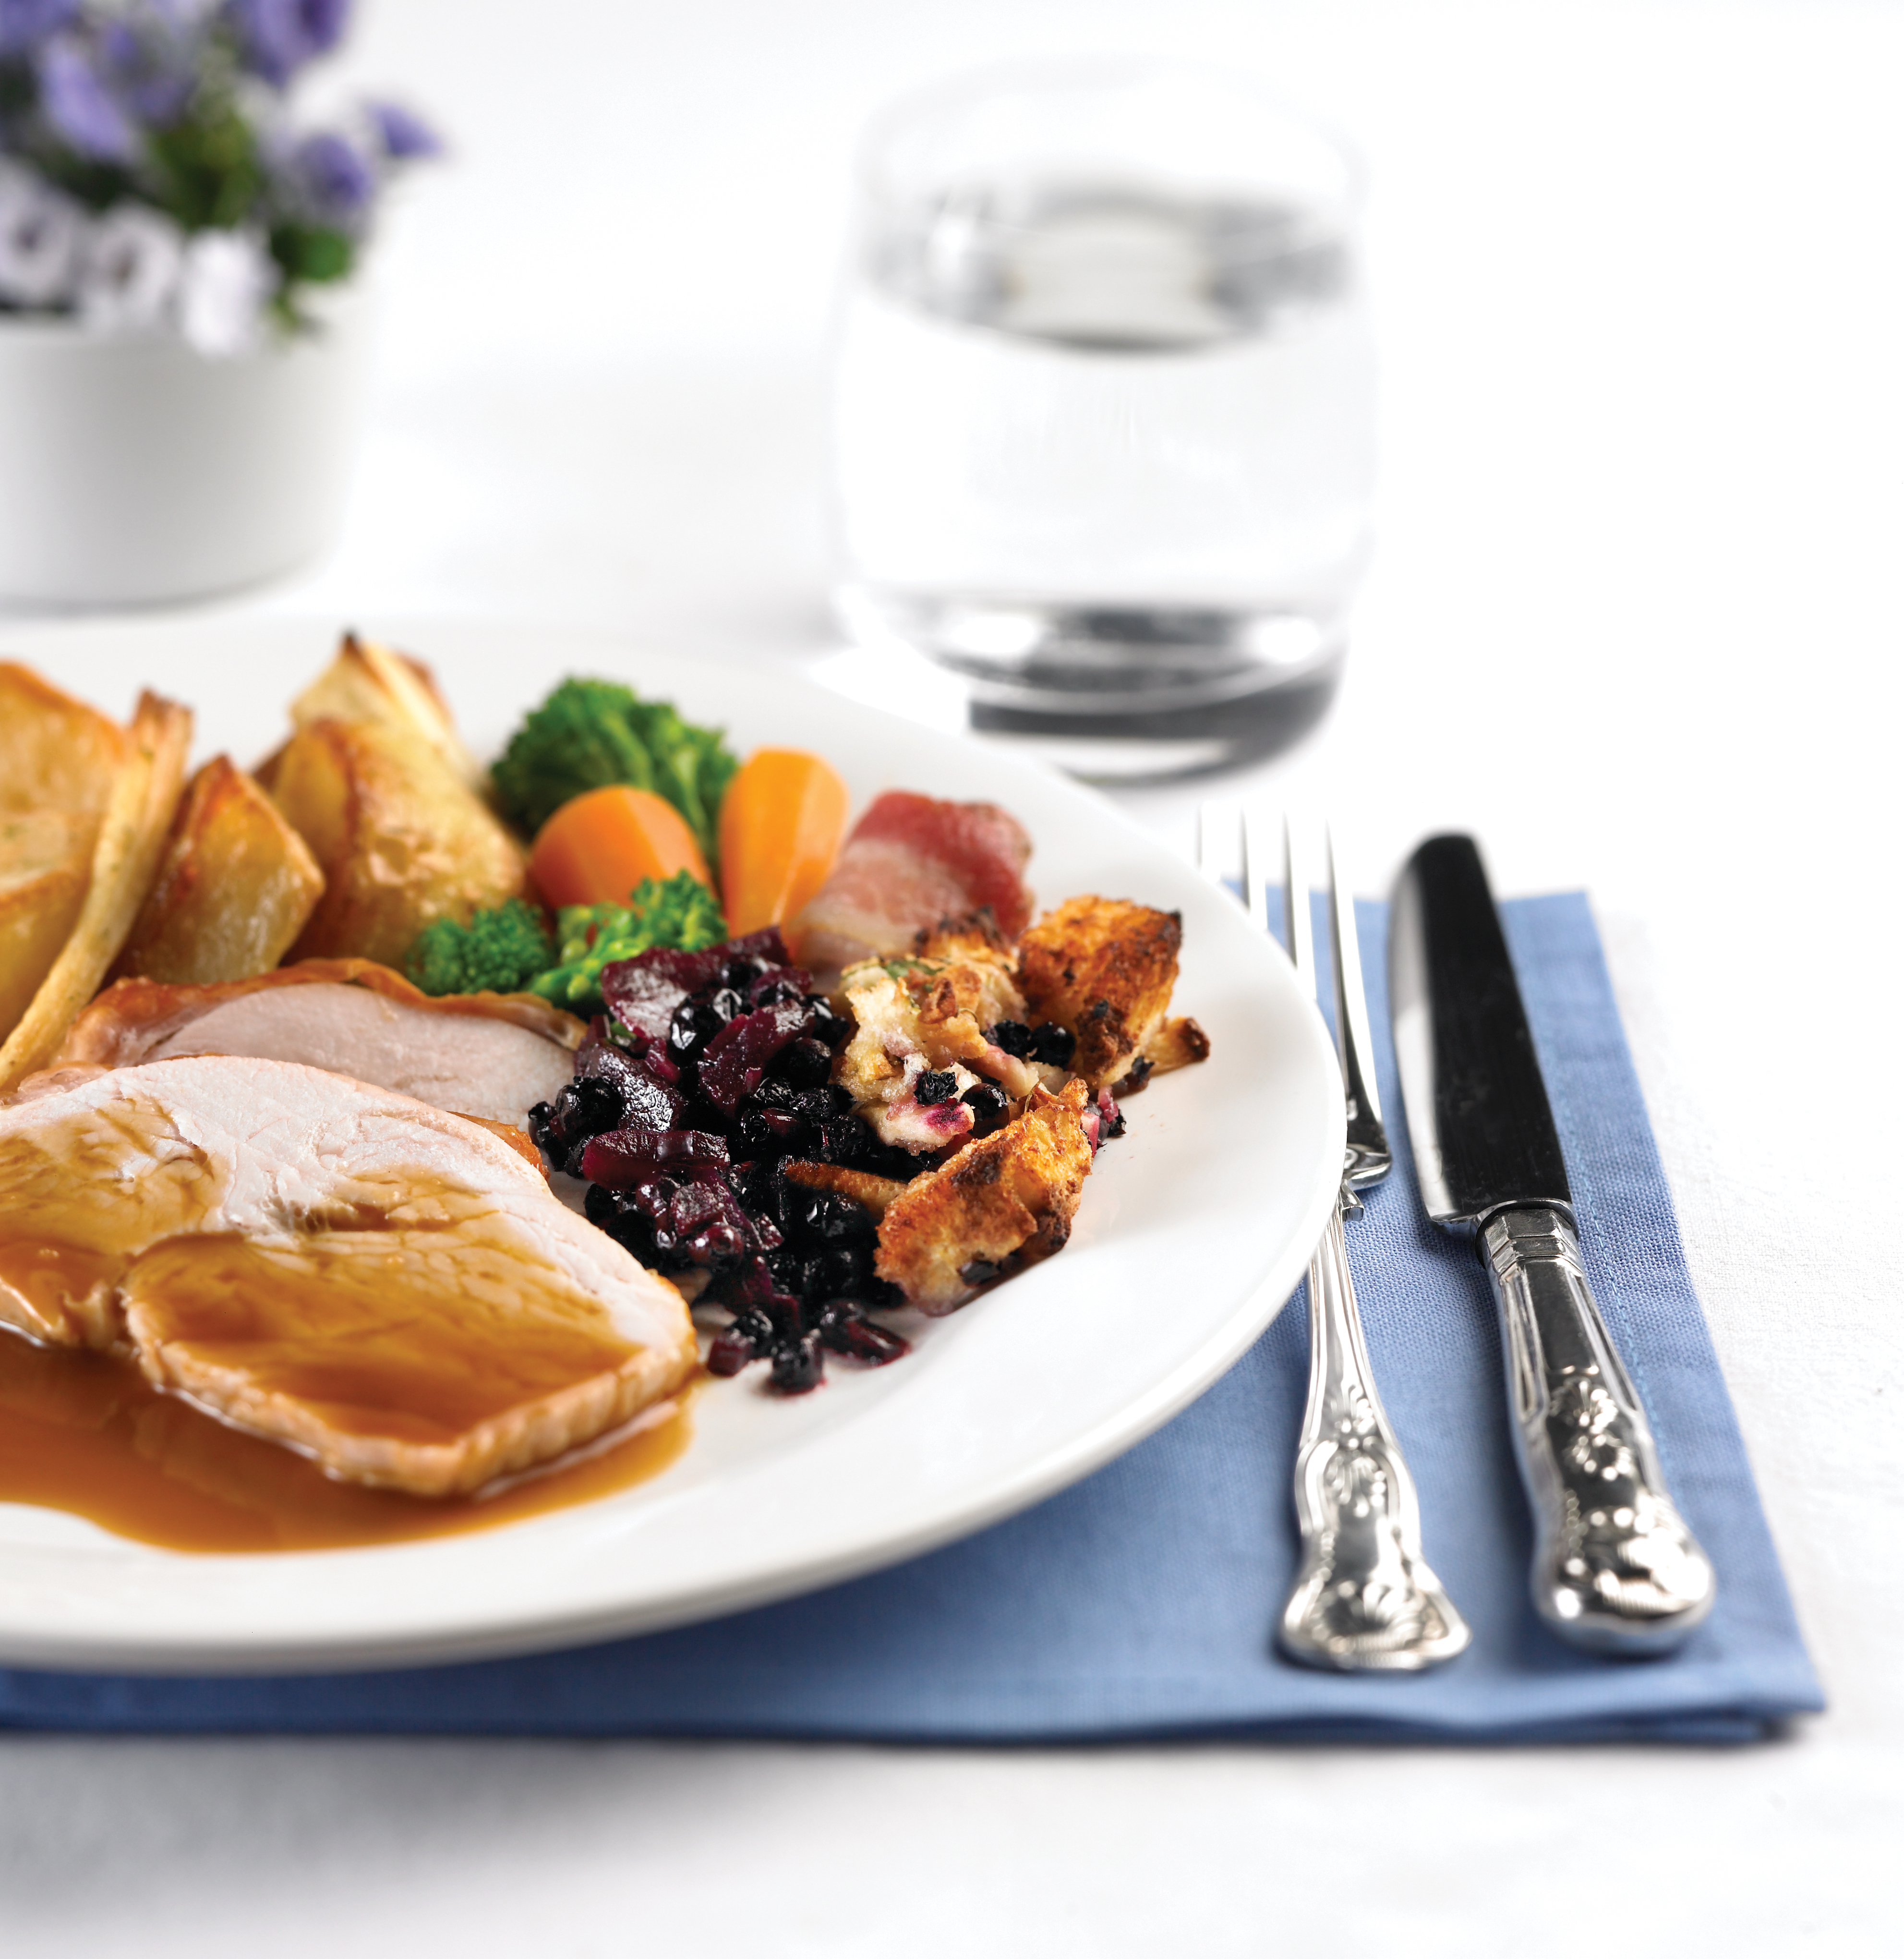 Roast Turkey with Wild Blueberry Stuffing and Apple Compote Picture